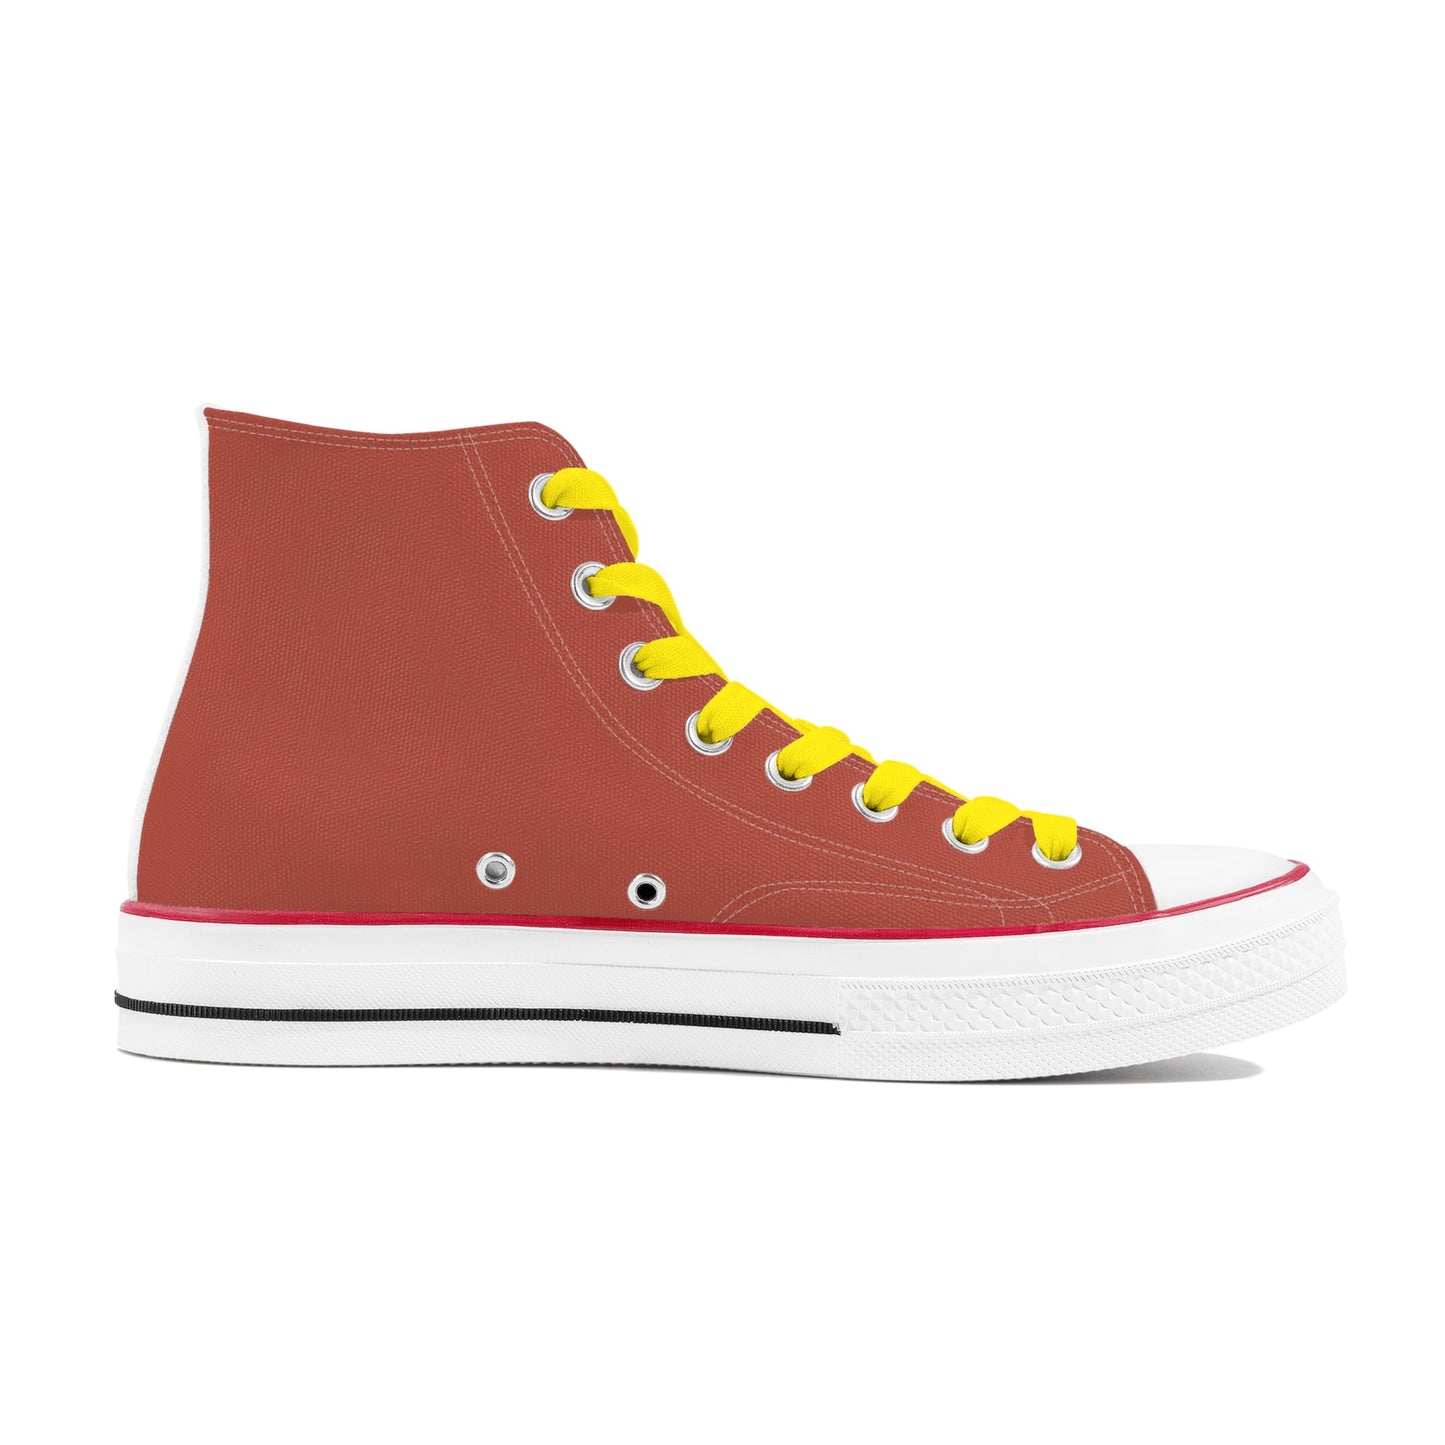 Moose - Classic High Top Canvas Shoes